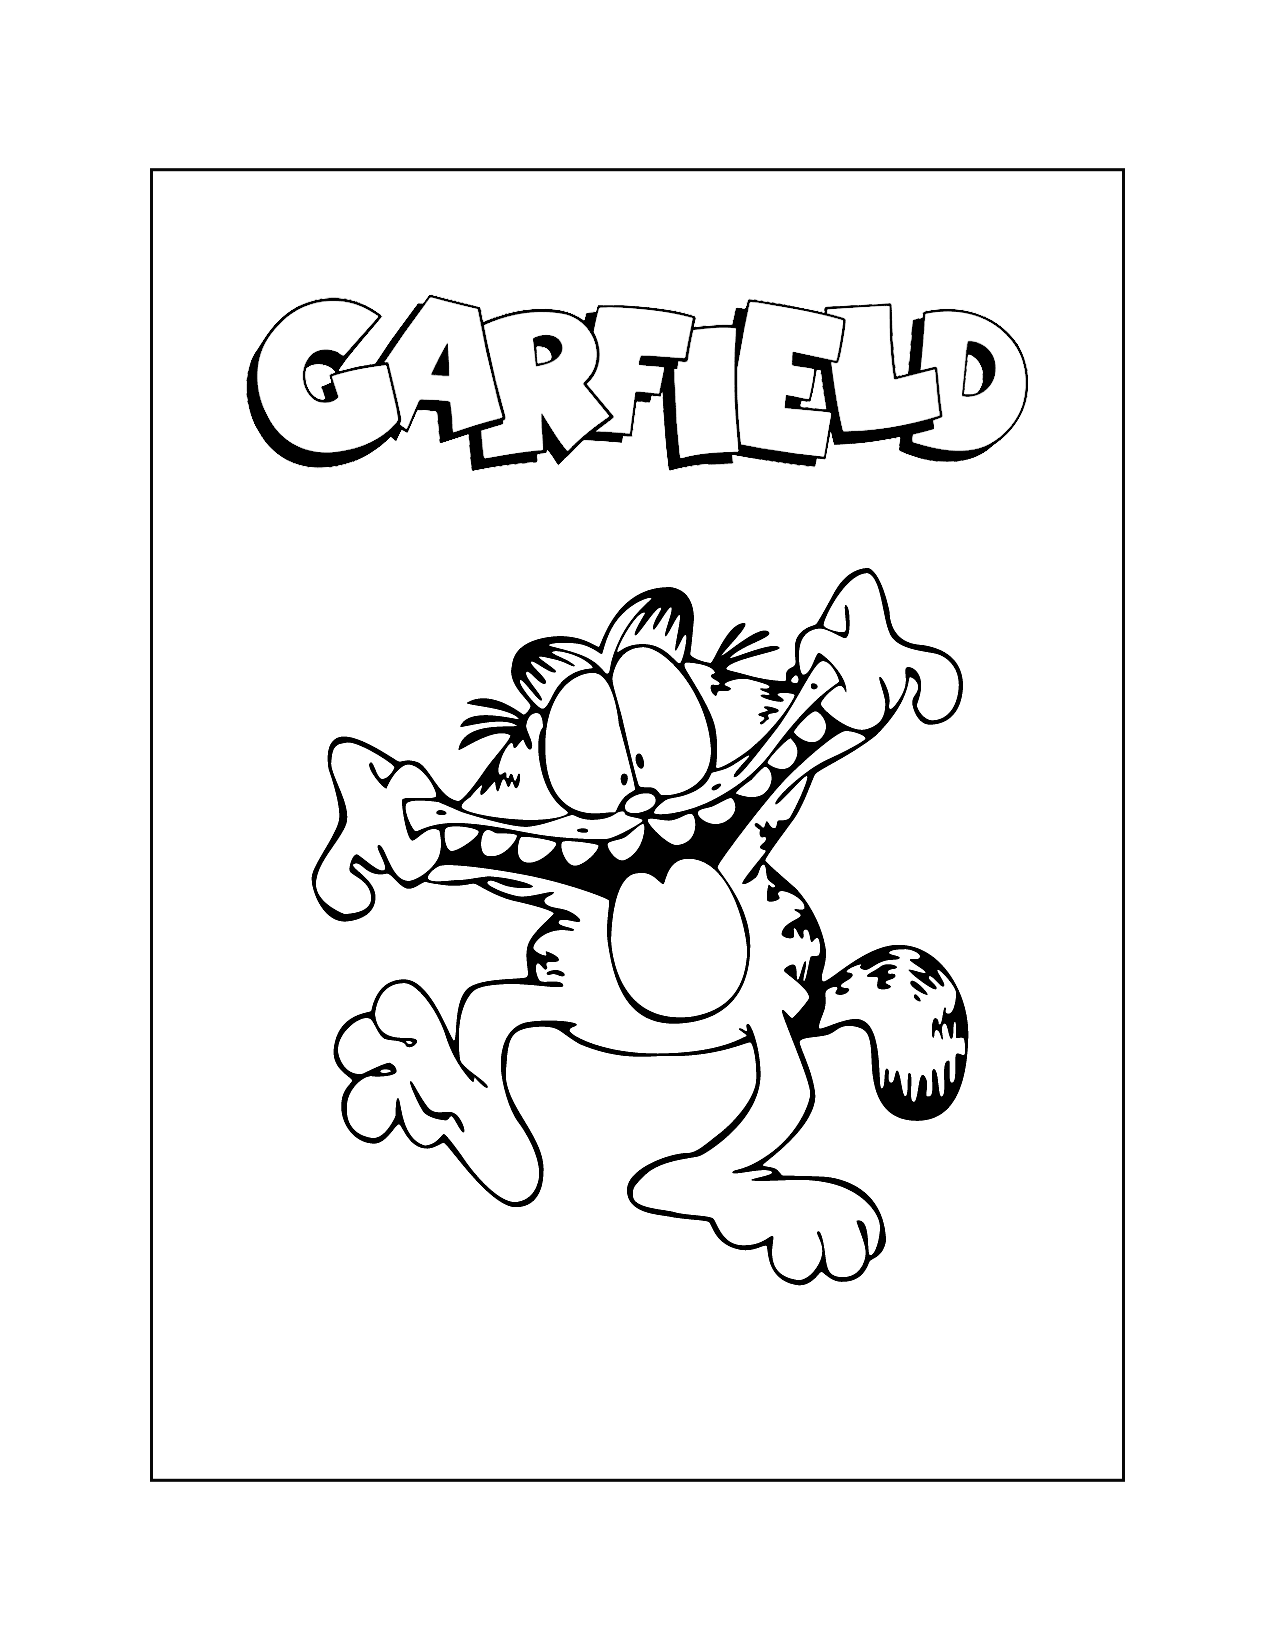 Garfield Making A Funny Face Coloring Page